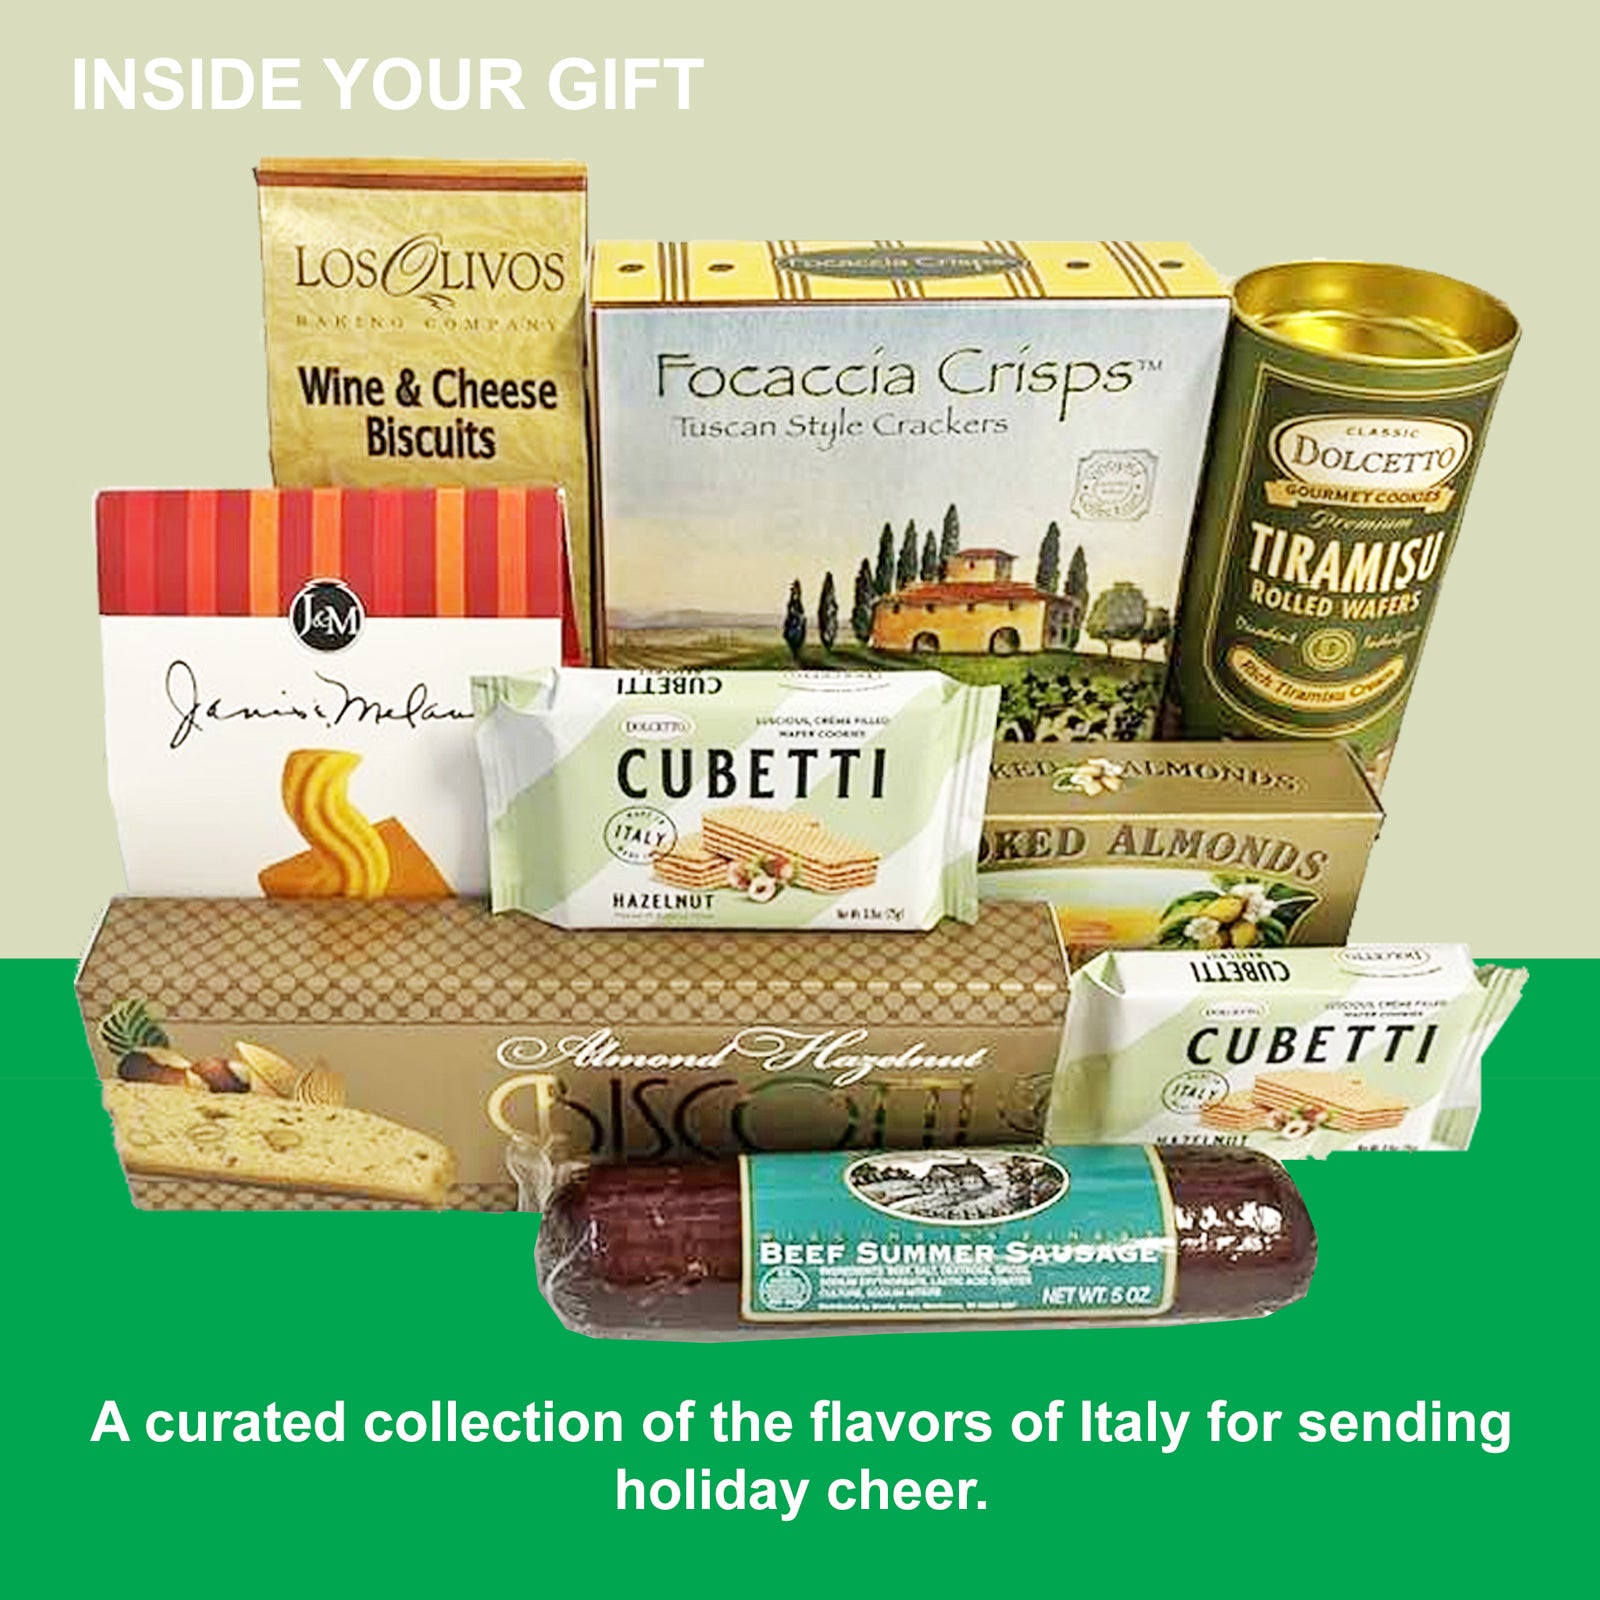 Buon Appetito Gourmet Gift Box with Crackers, Sausage, Snacks and Cookies to Celebrate Mom